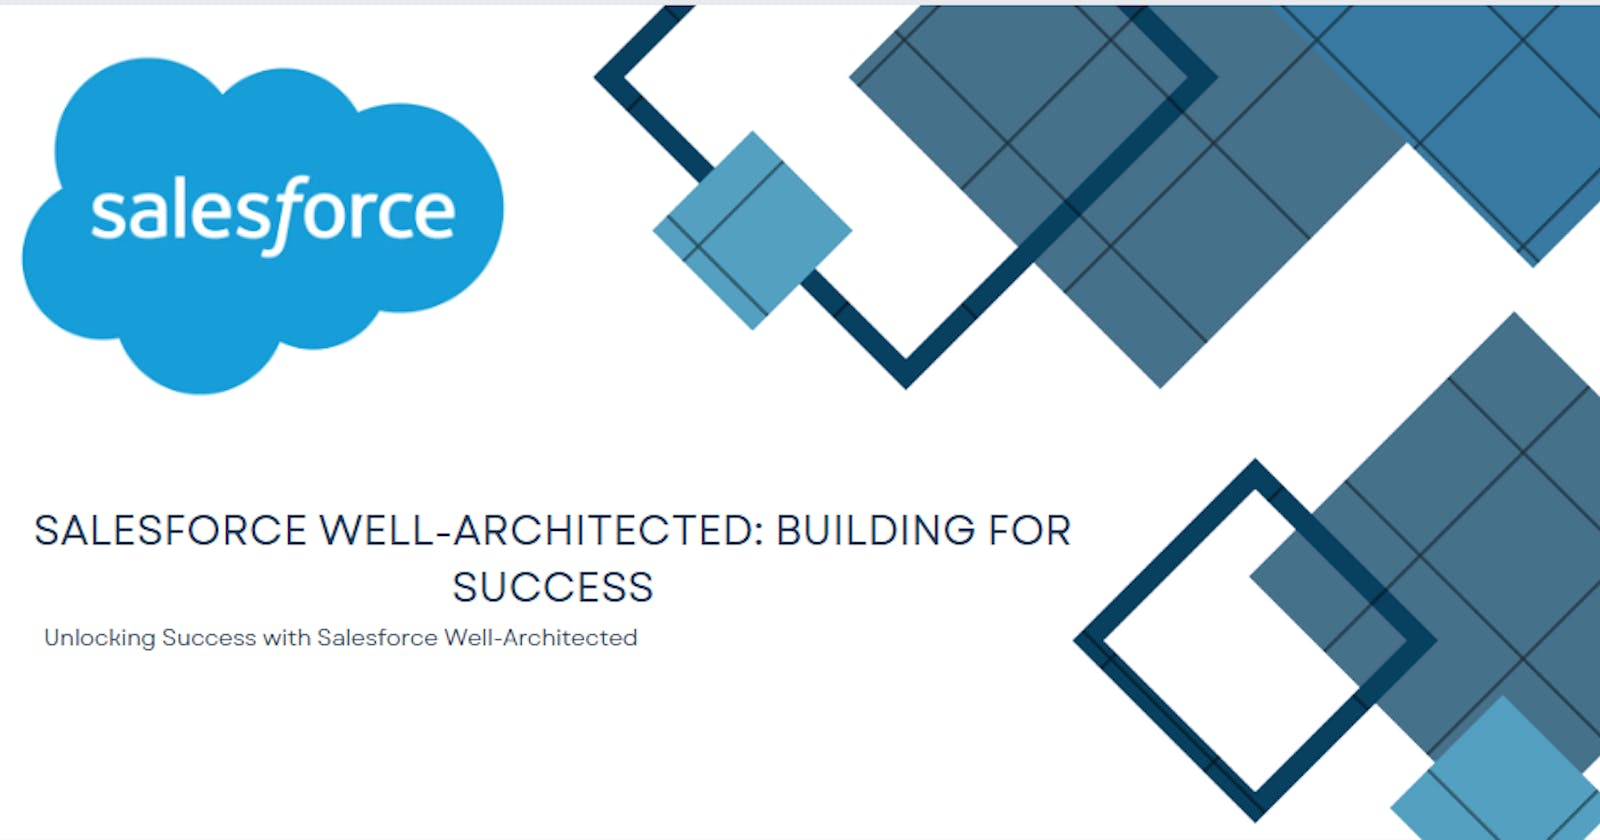 Salesforce Well-Architected: Building for Success